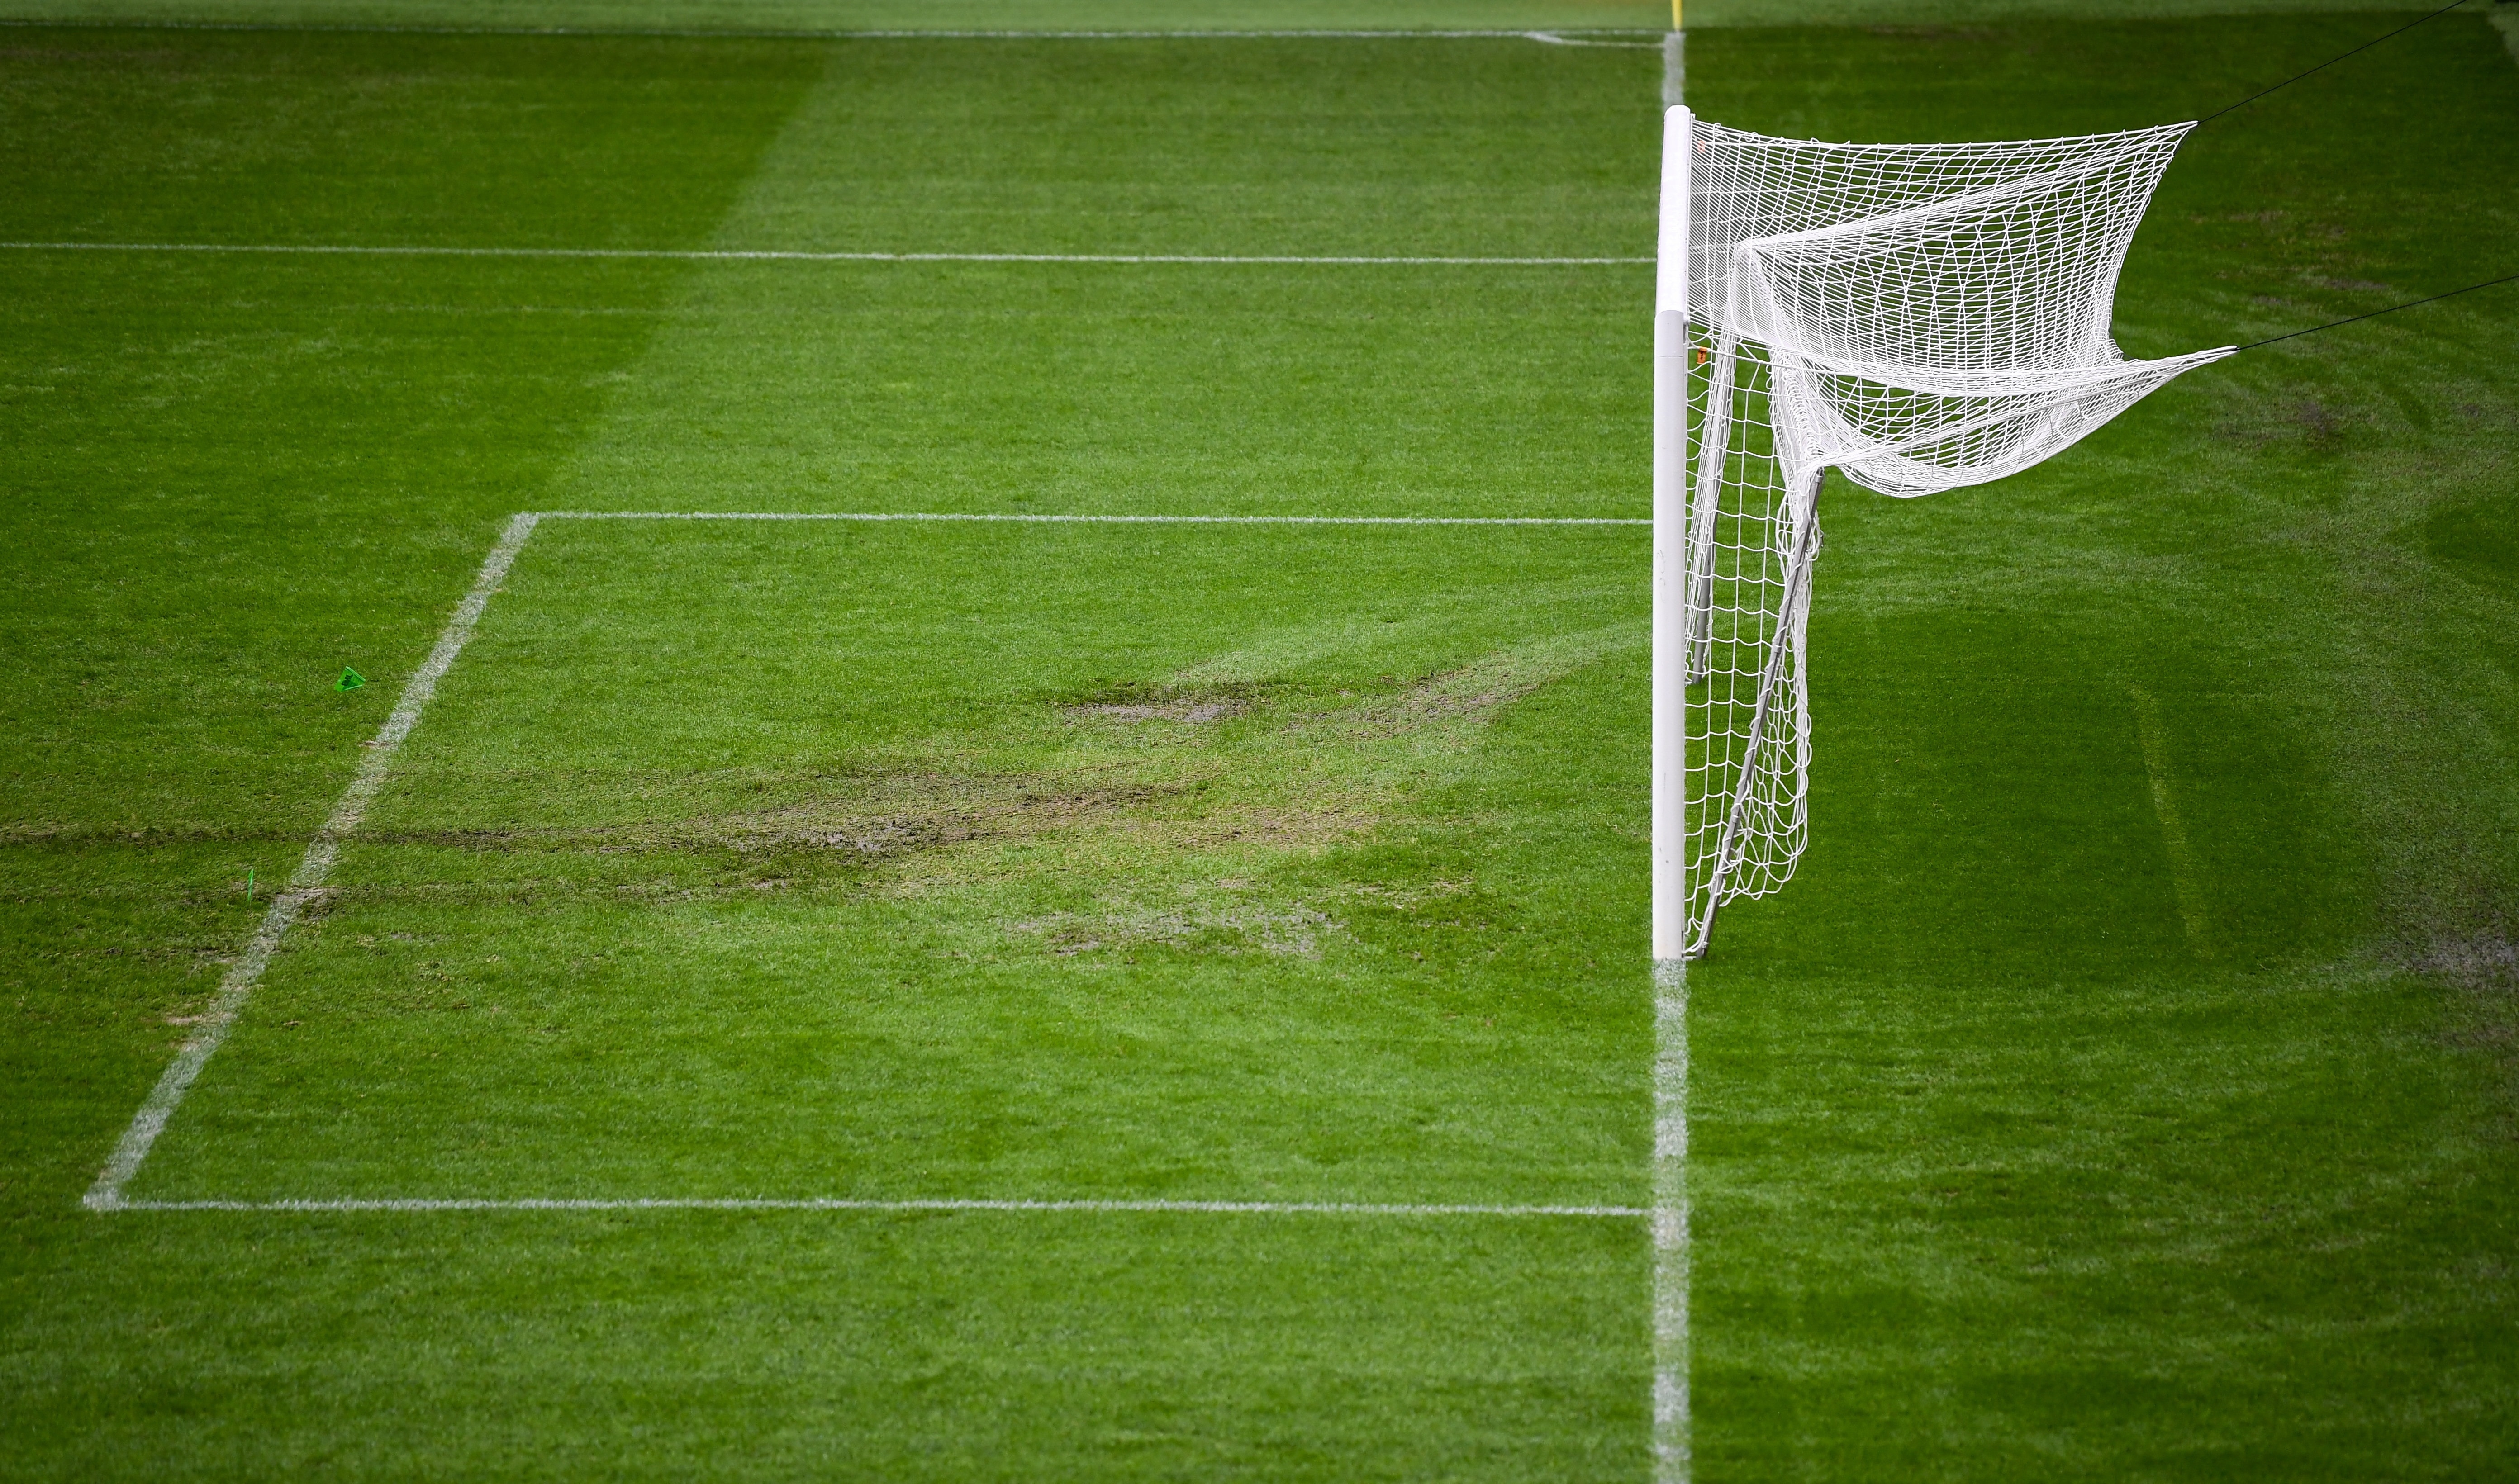 Update: Ireland's Euro 2020 qualifier to go ahead as pitch passes inspection